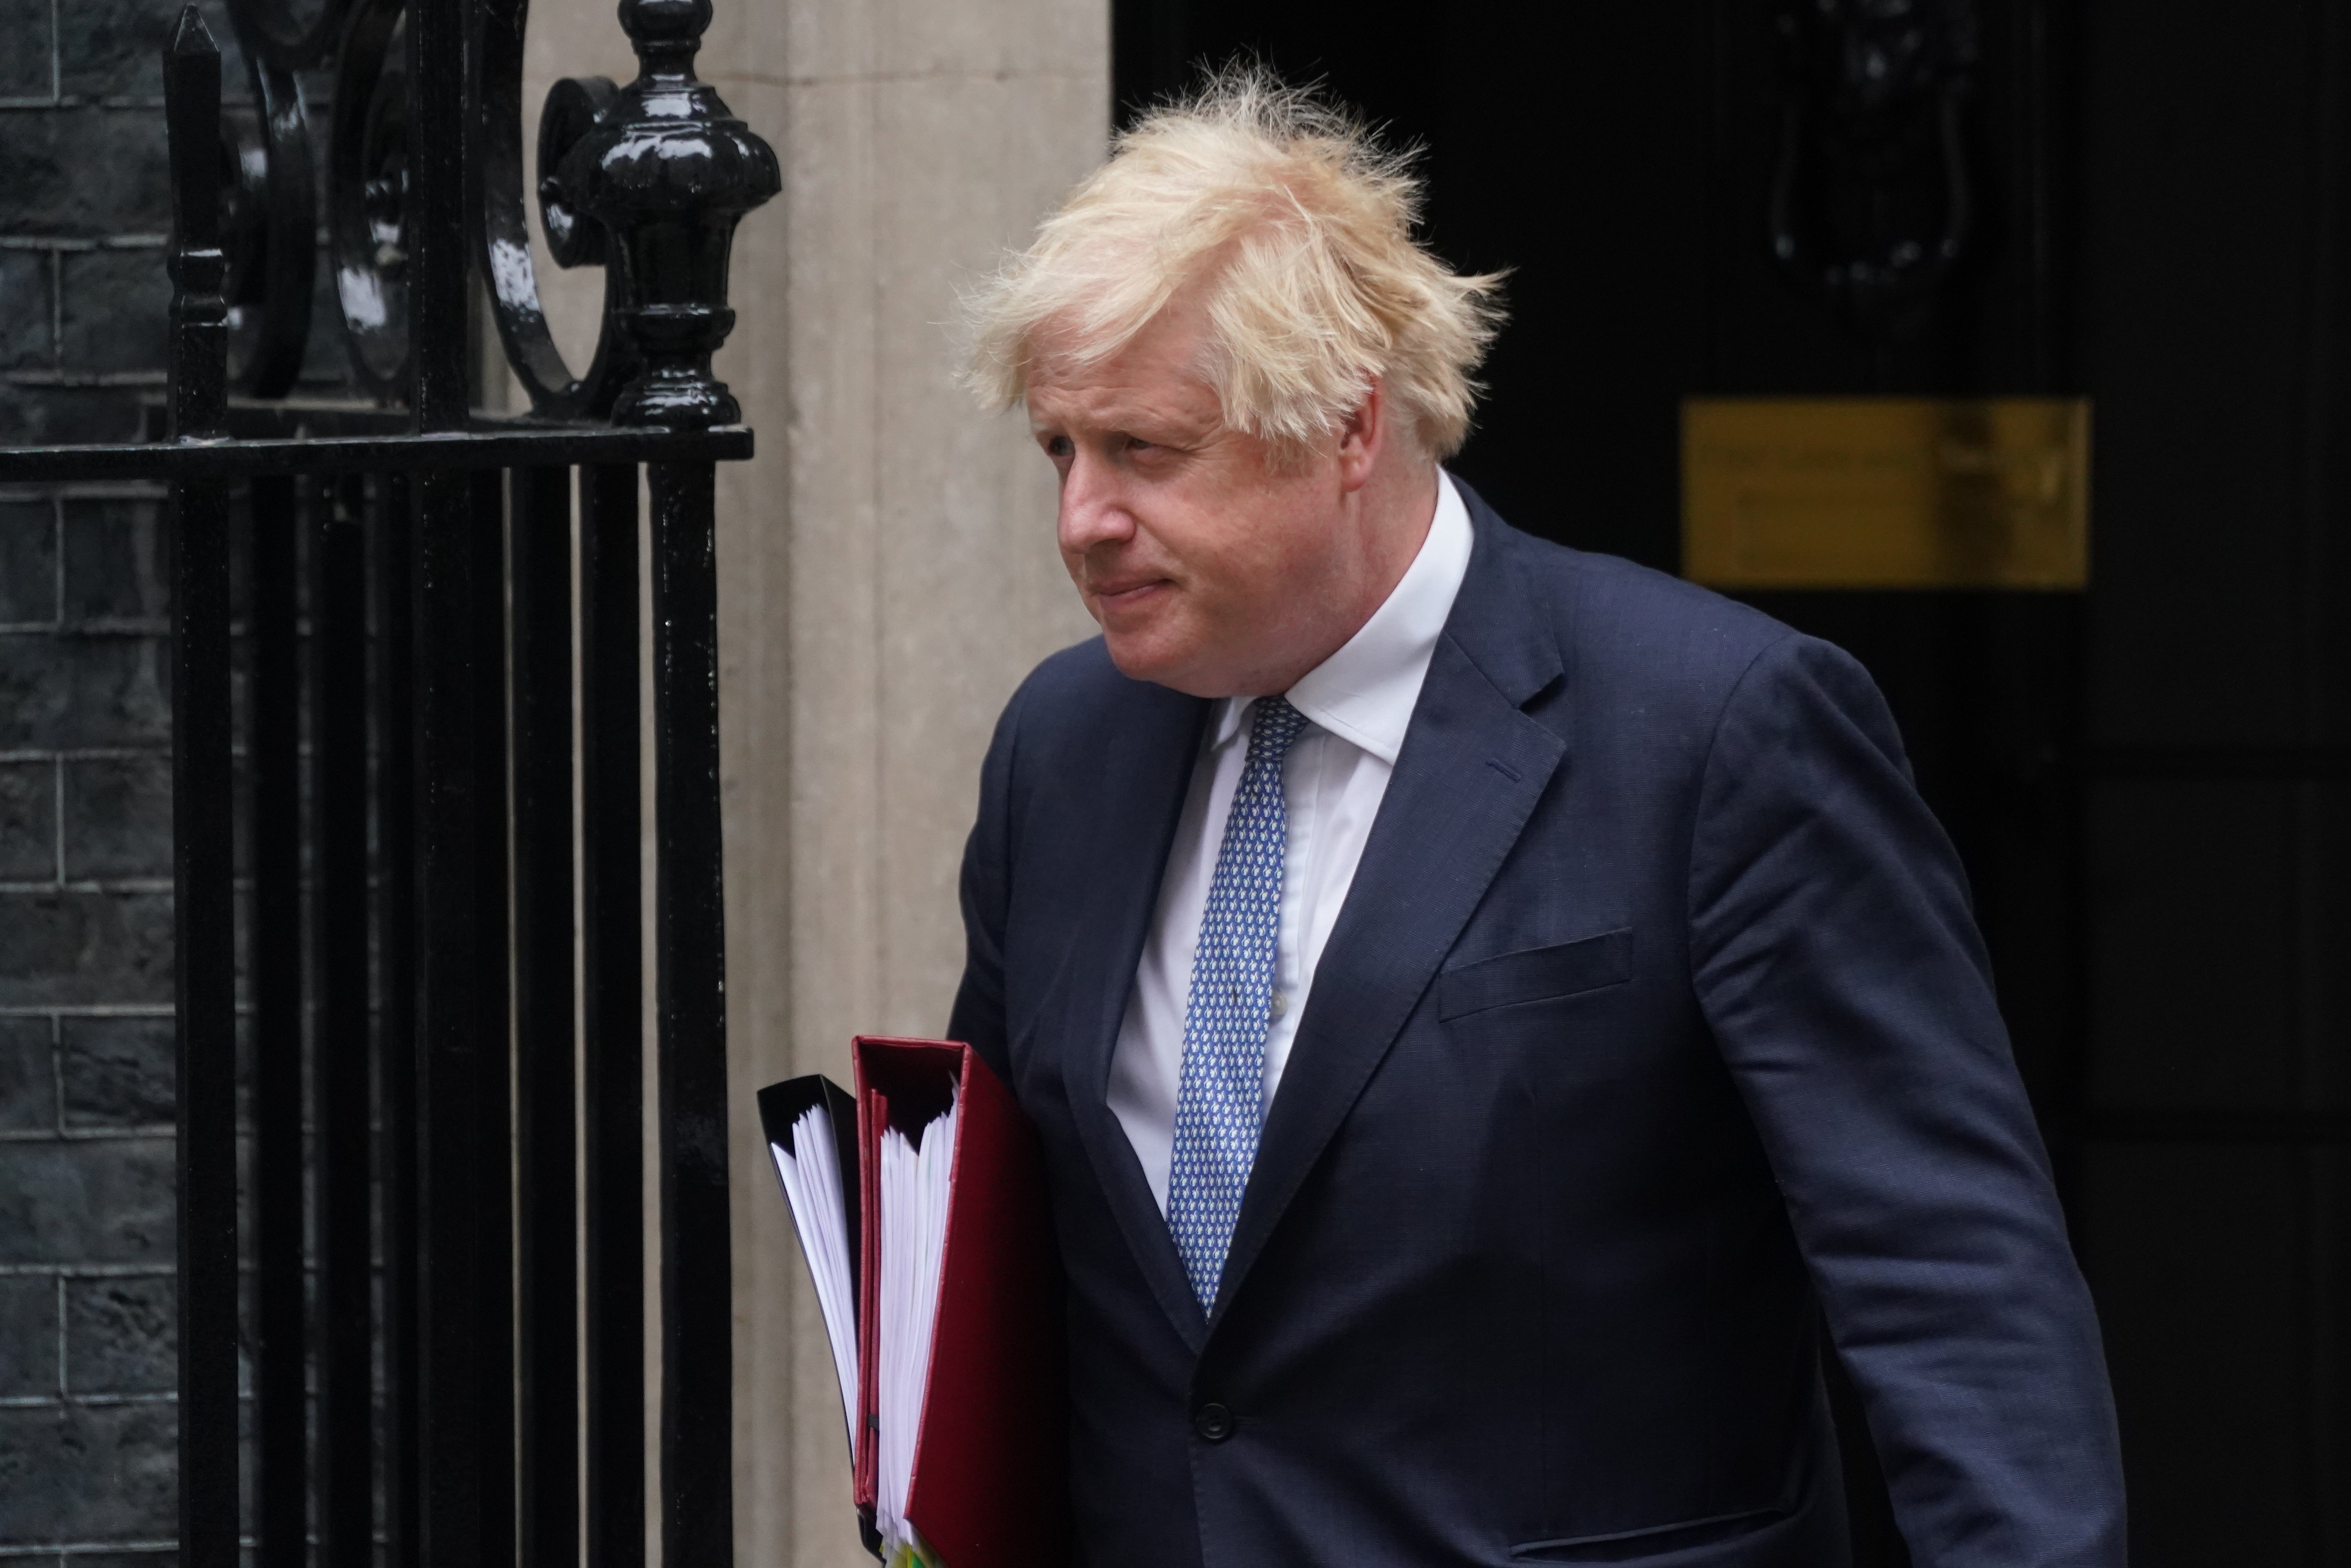 A survey of activists conducted by the ConservativeHome website has rated Boris Johnson the least popular member of the cabinet